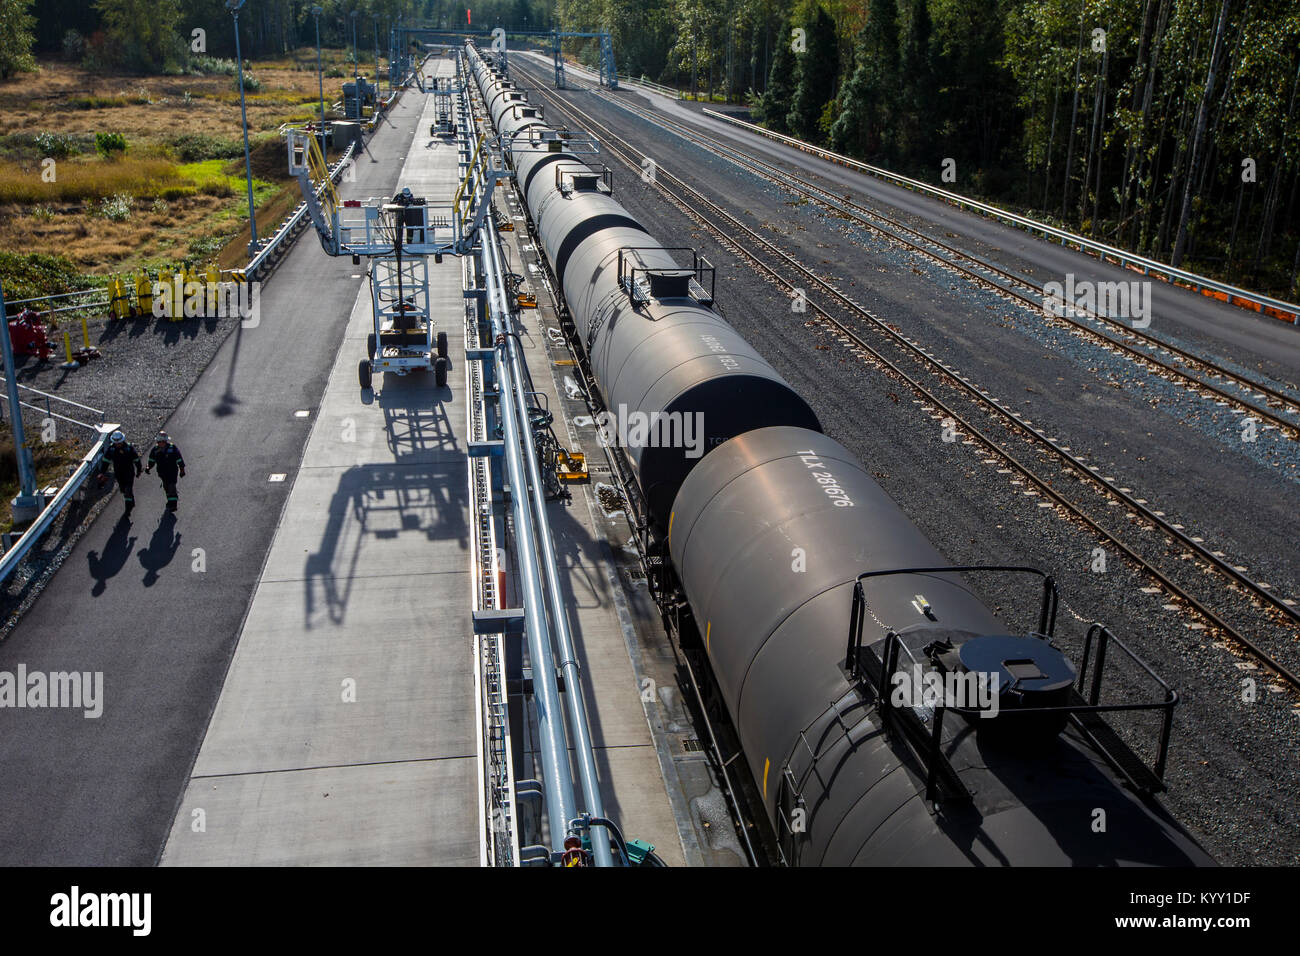 High angle view of freight train on railroad tracks during sunny day Stock Photo